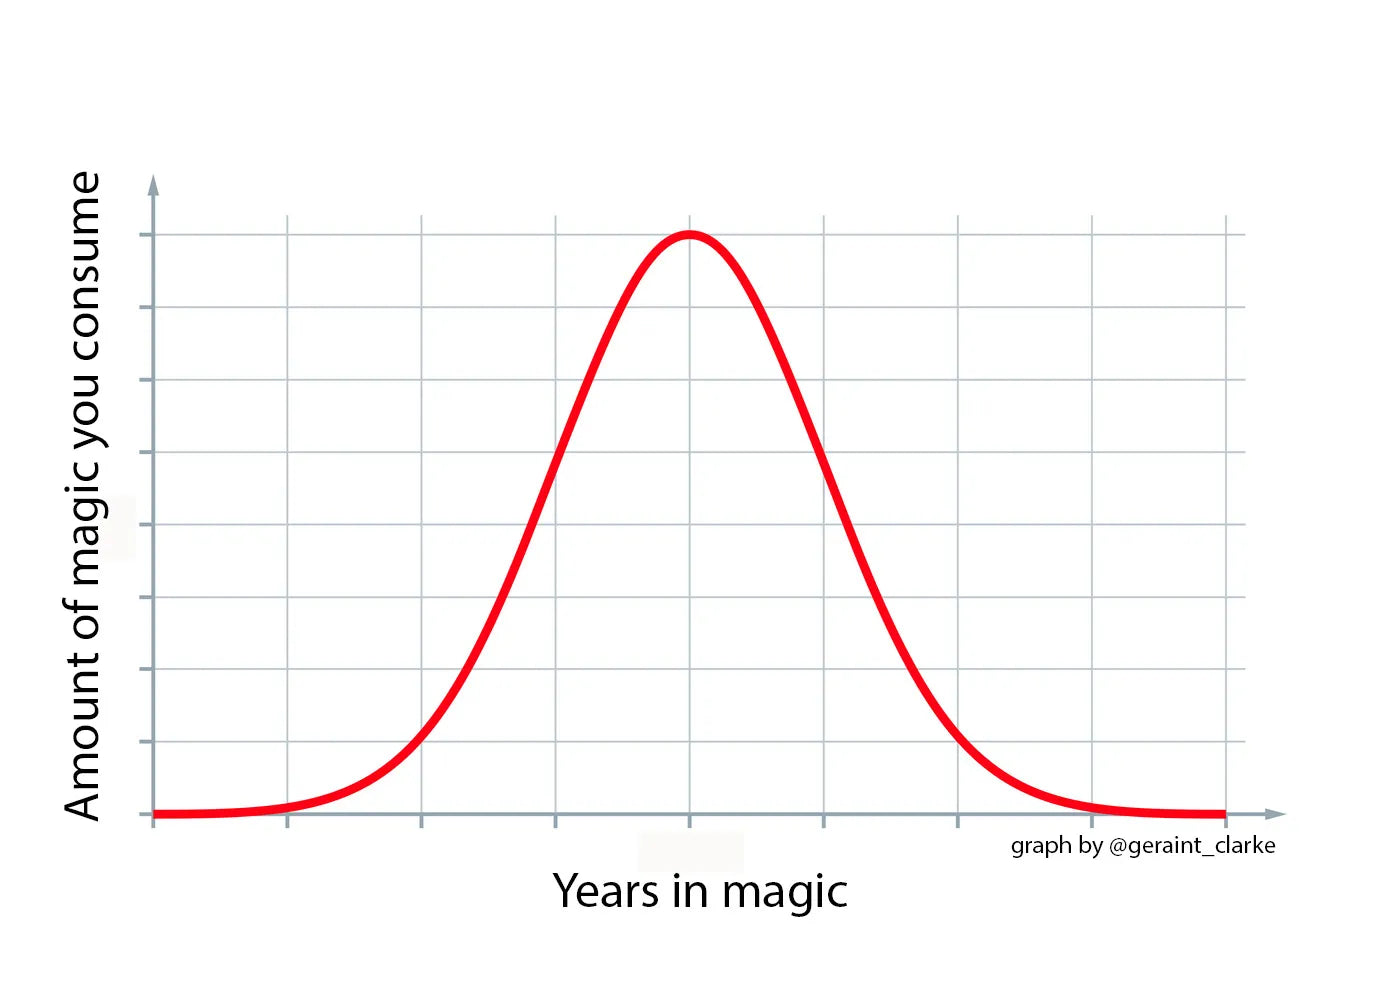 The Bell Curve of Learning Magic